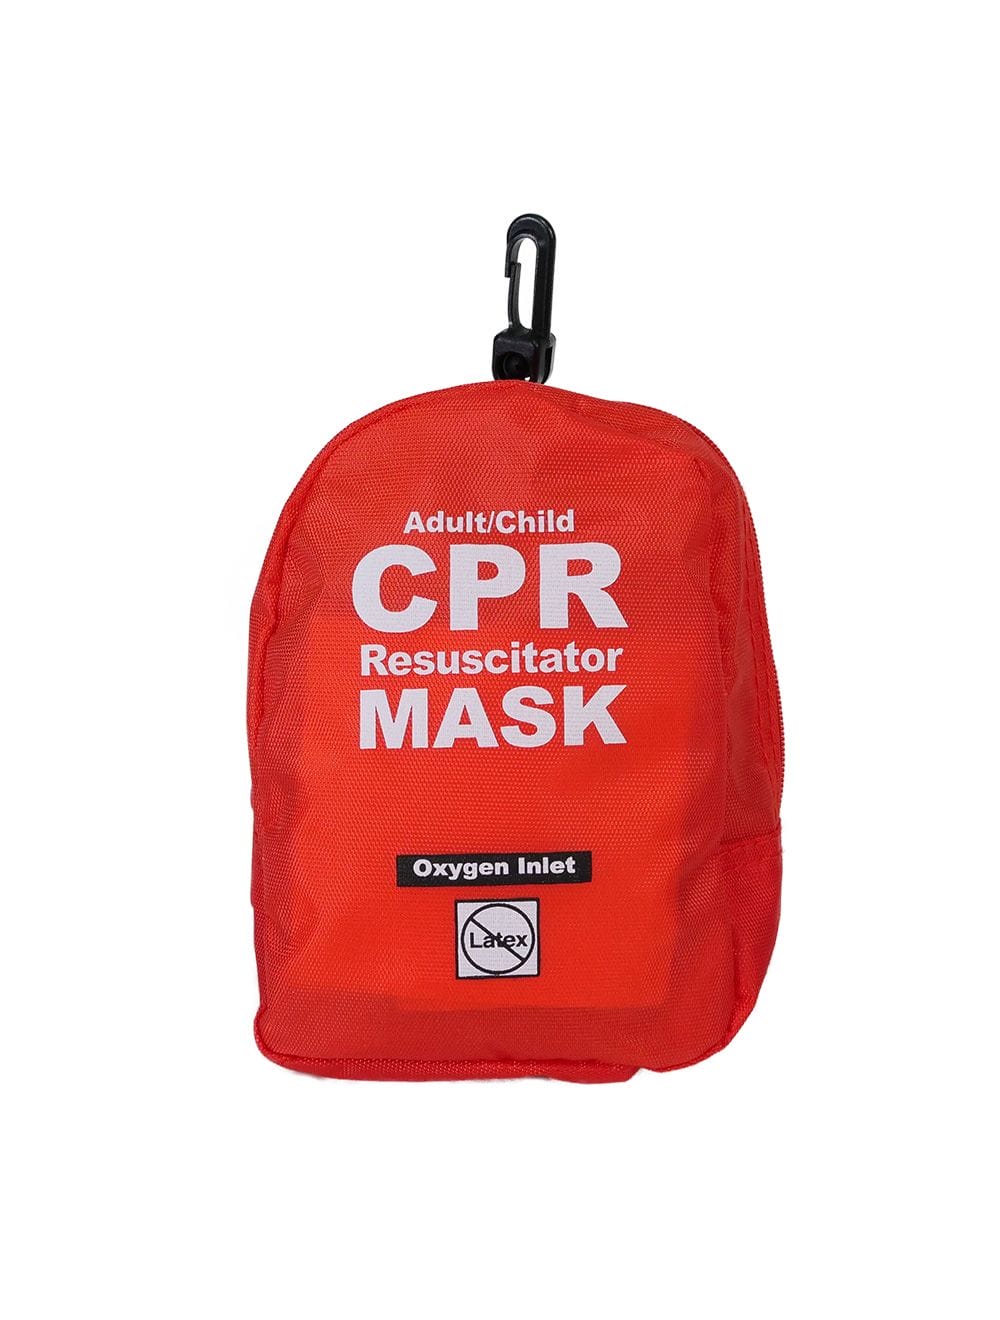 Adult/Child & Infant CPR resuscitator | WNL Products